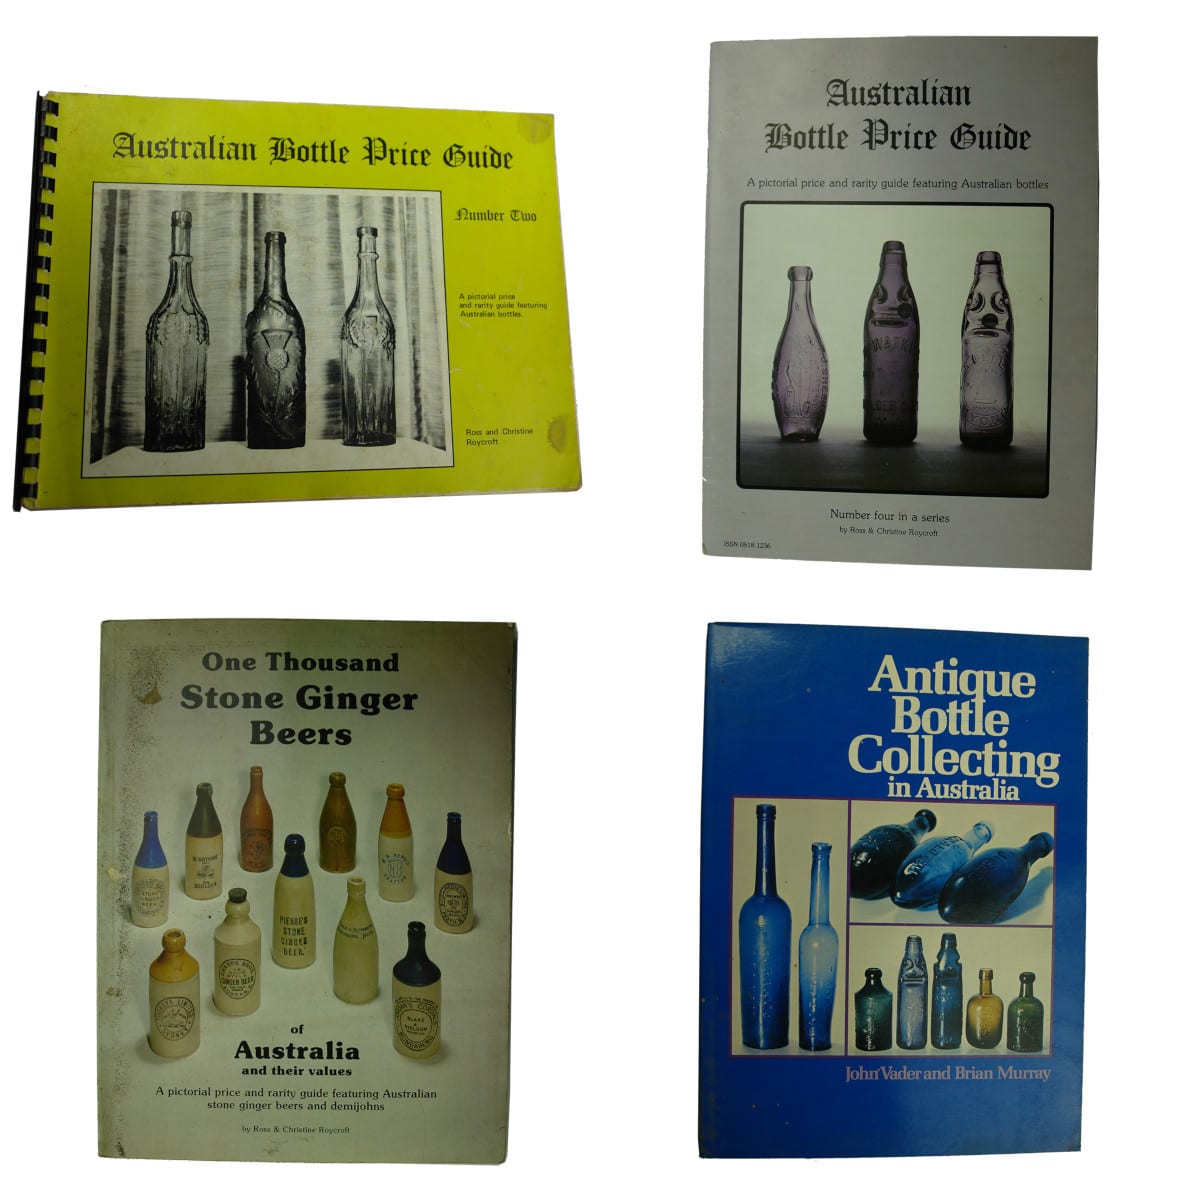 4 Books: Price Guide 2; Price Guide 4; One Thousand Stone Ginger Beers. Ross & Christine Roycroft; Antique Bottle Collecting in Australia, Vader & Murray.